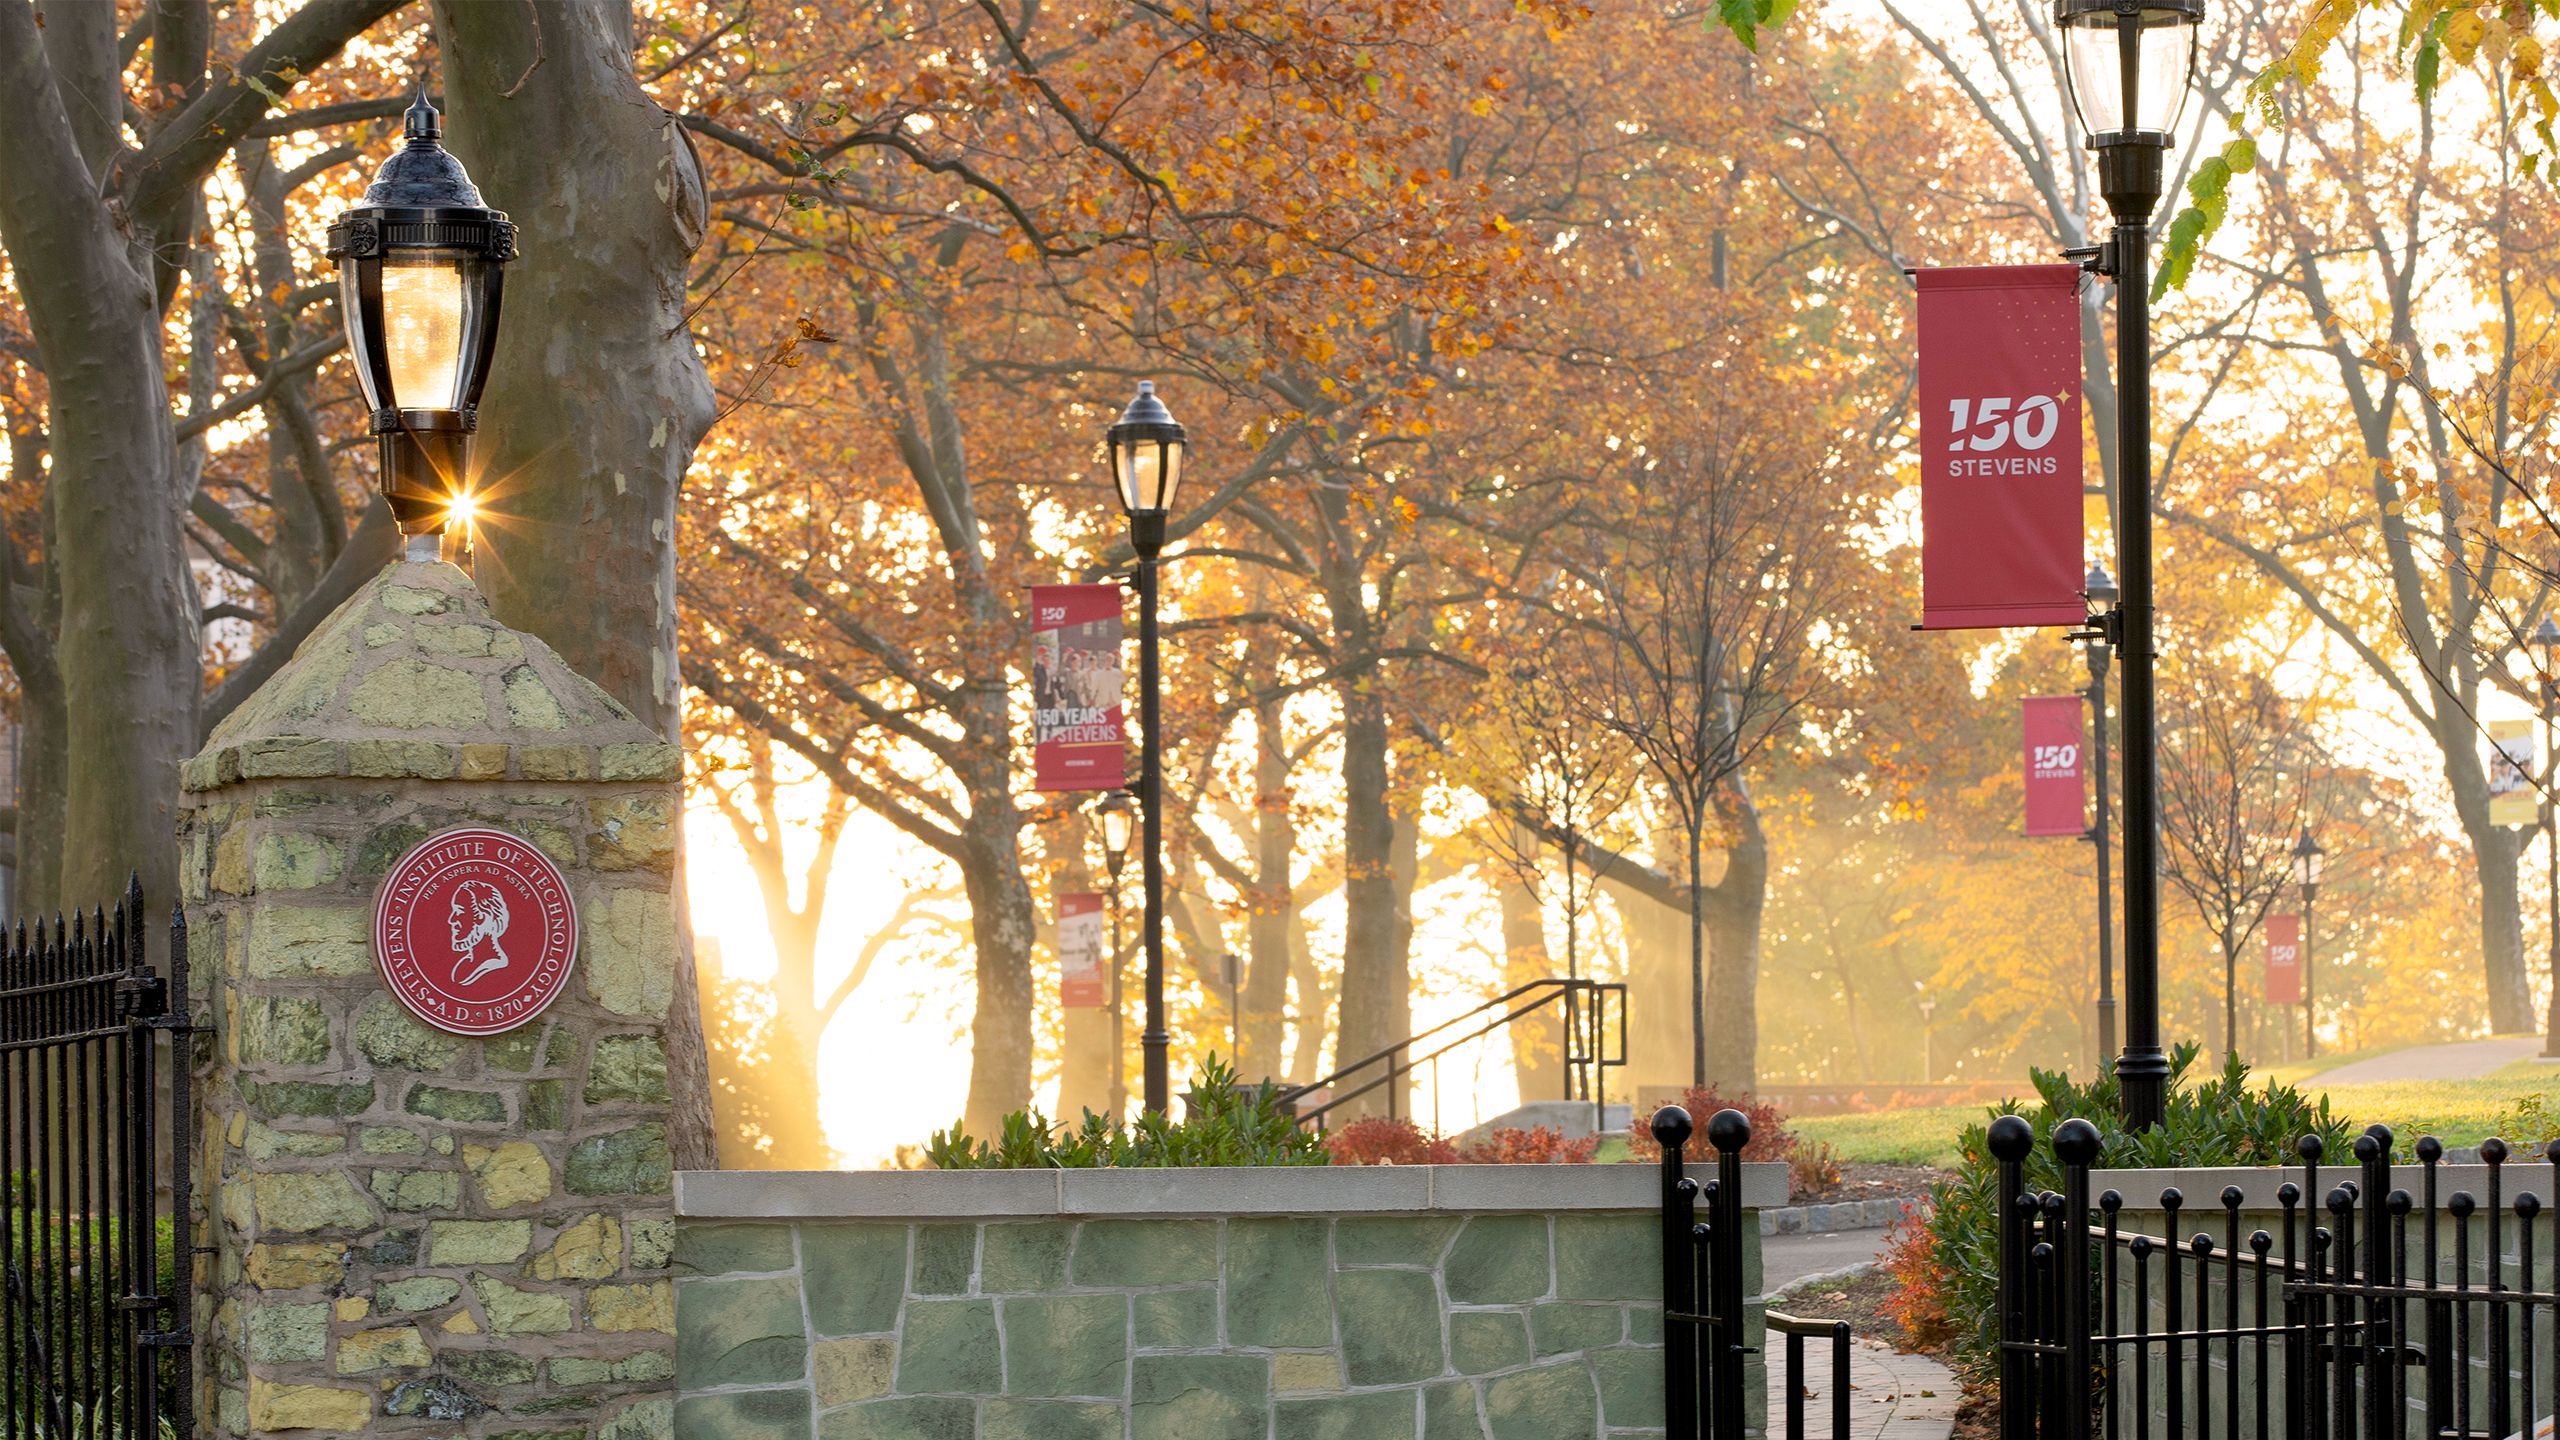 Entrance to Stevens Campus in Fall